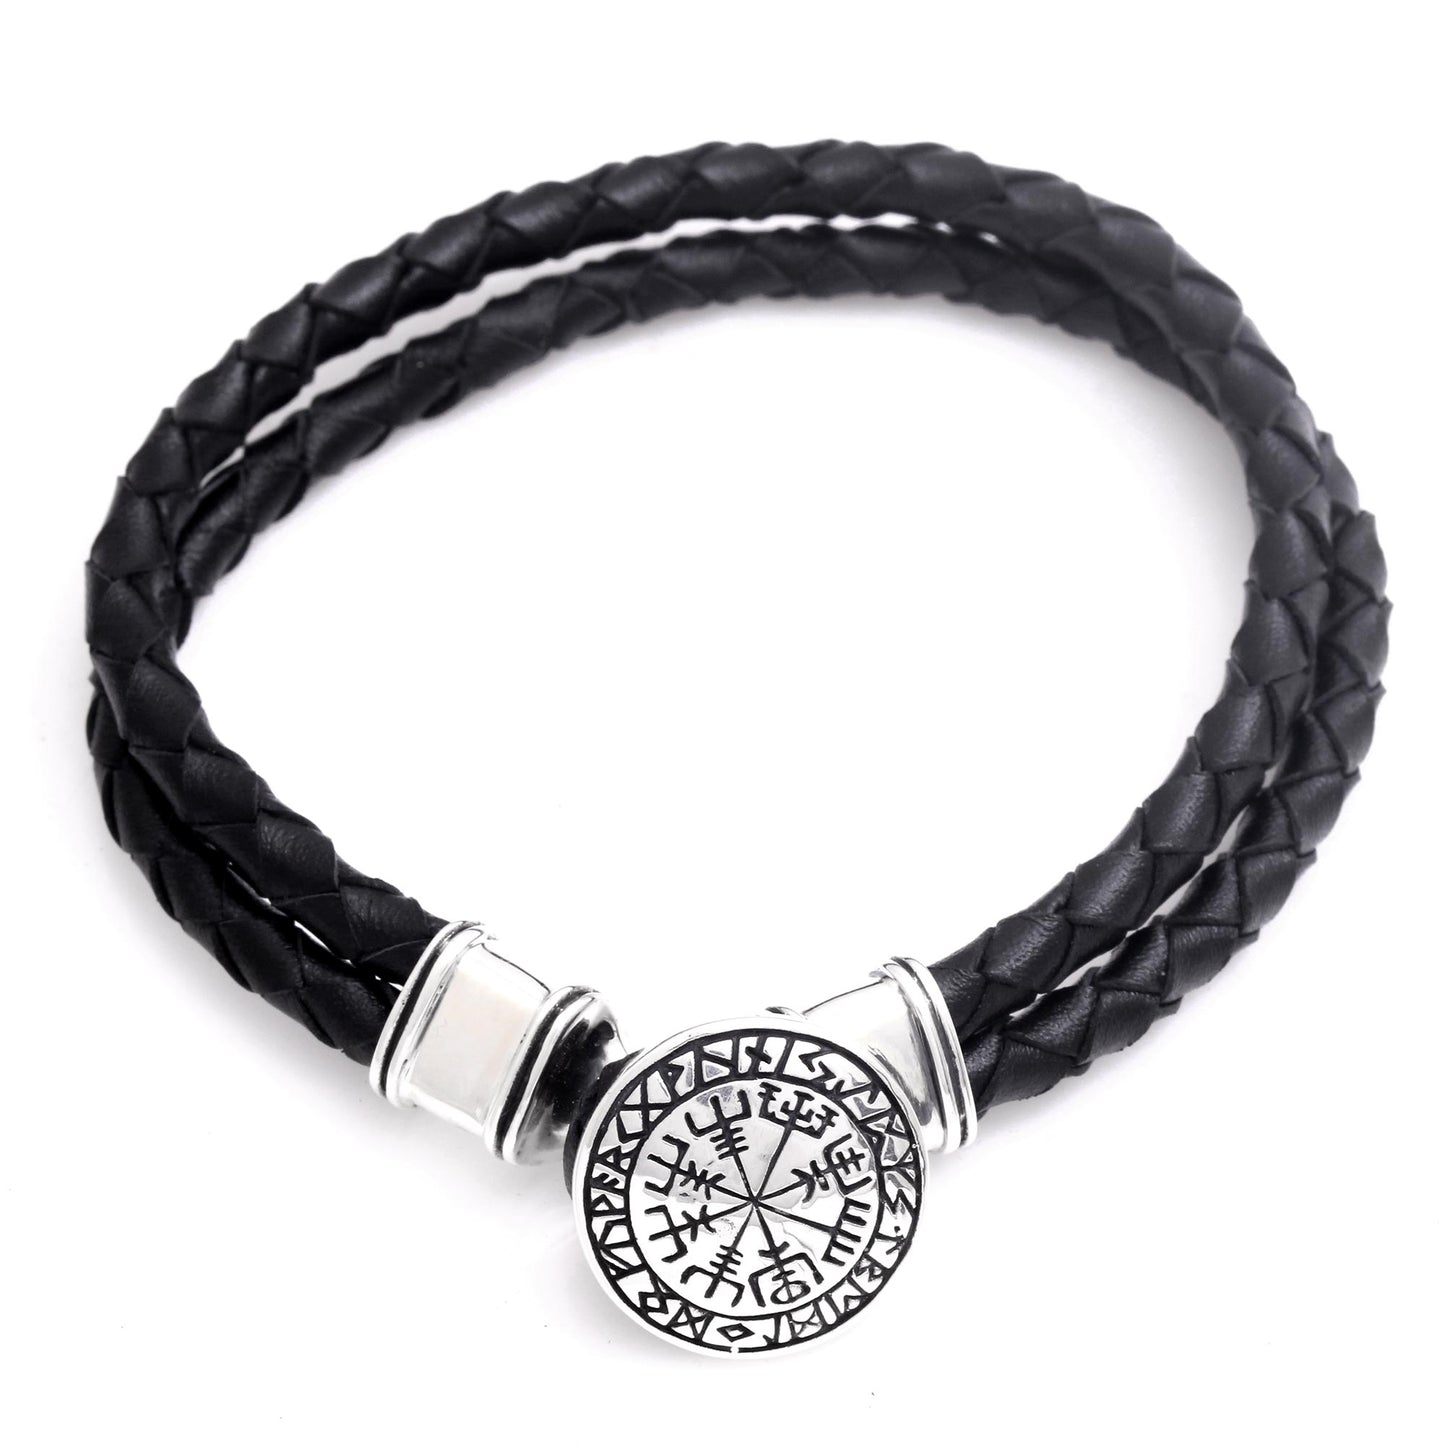 Runic Compass Men's Sterling Silver and Leather Bracelet from Bali